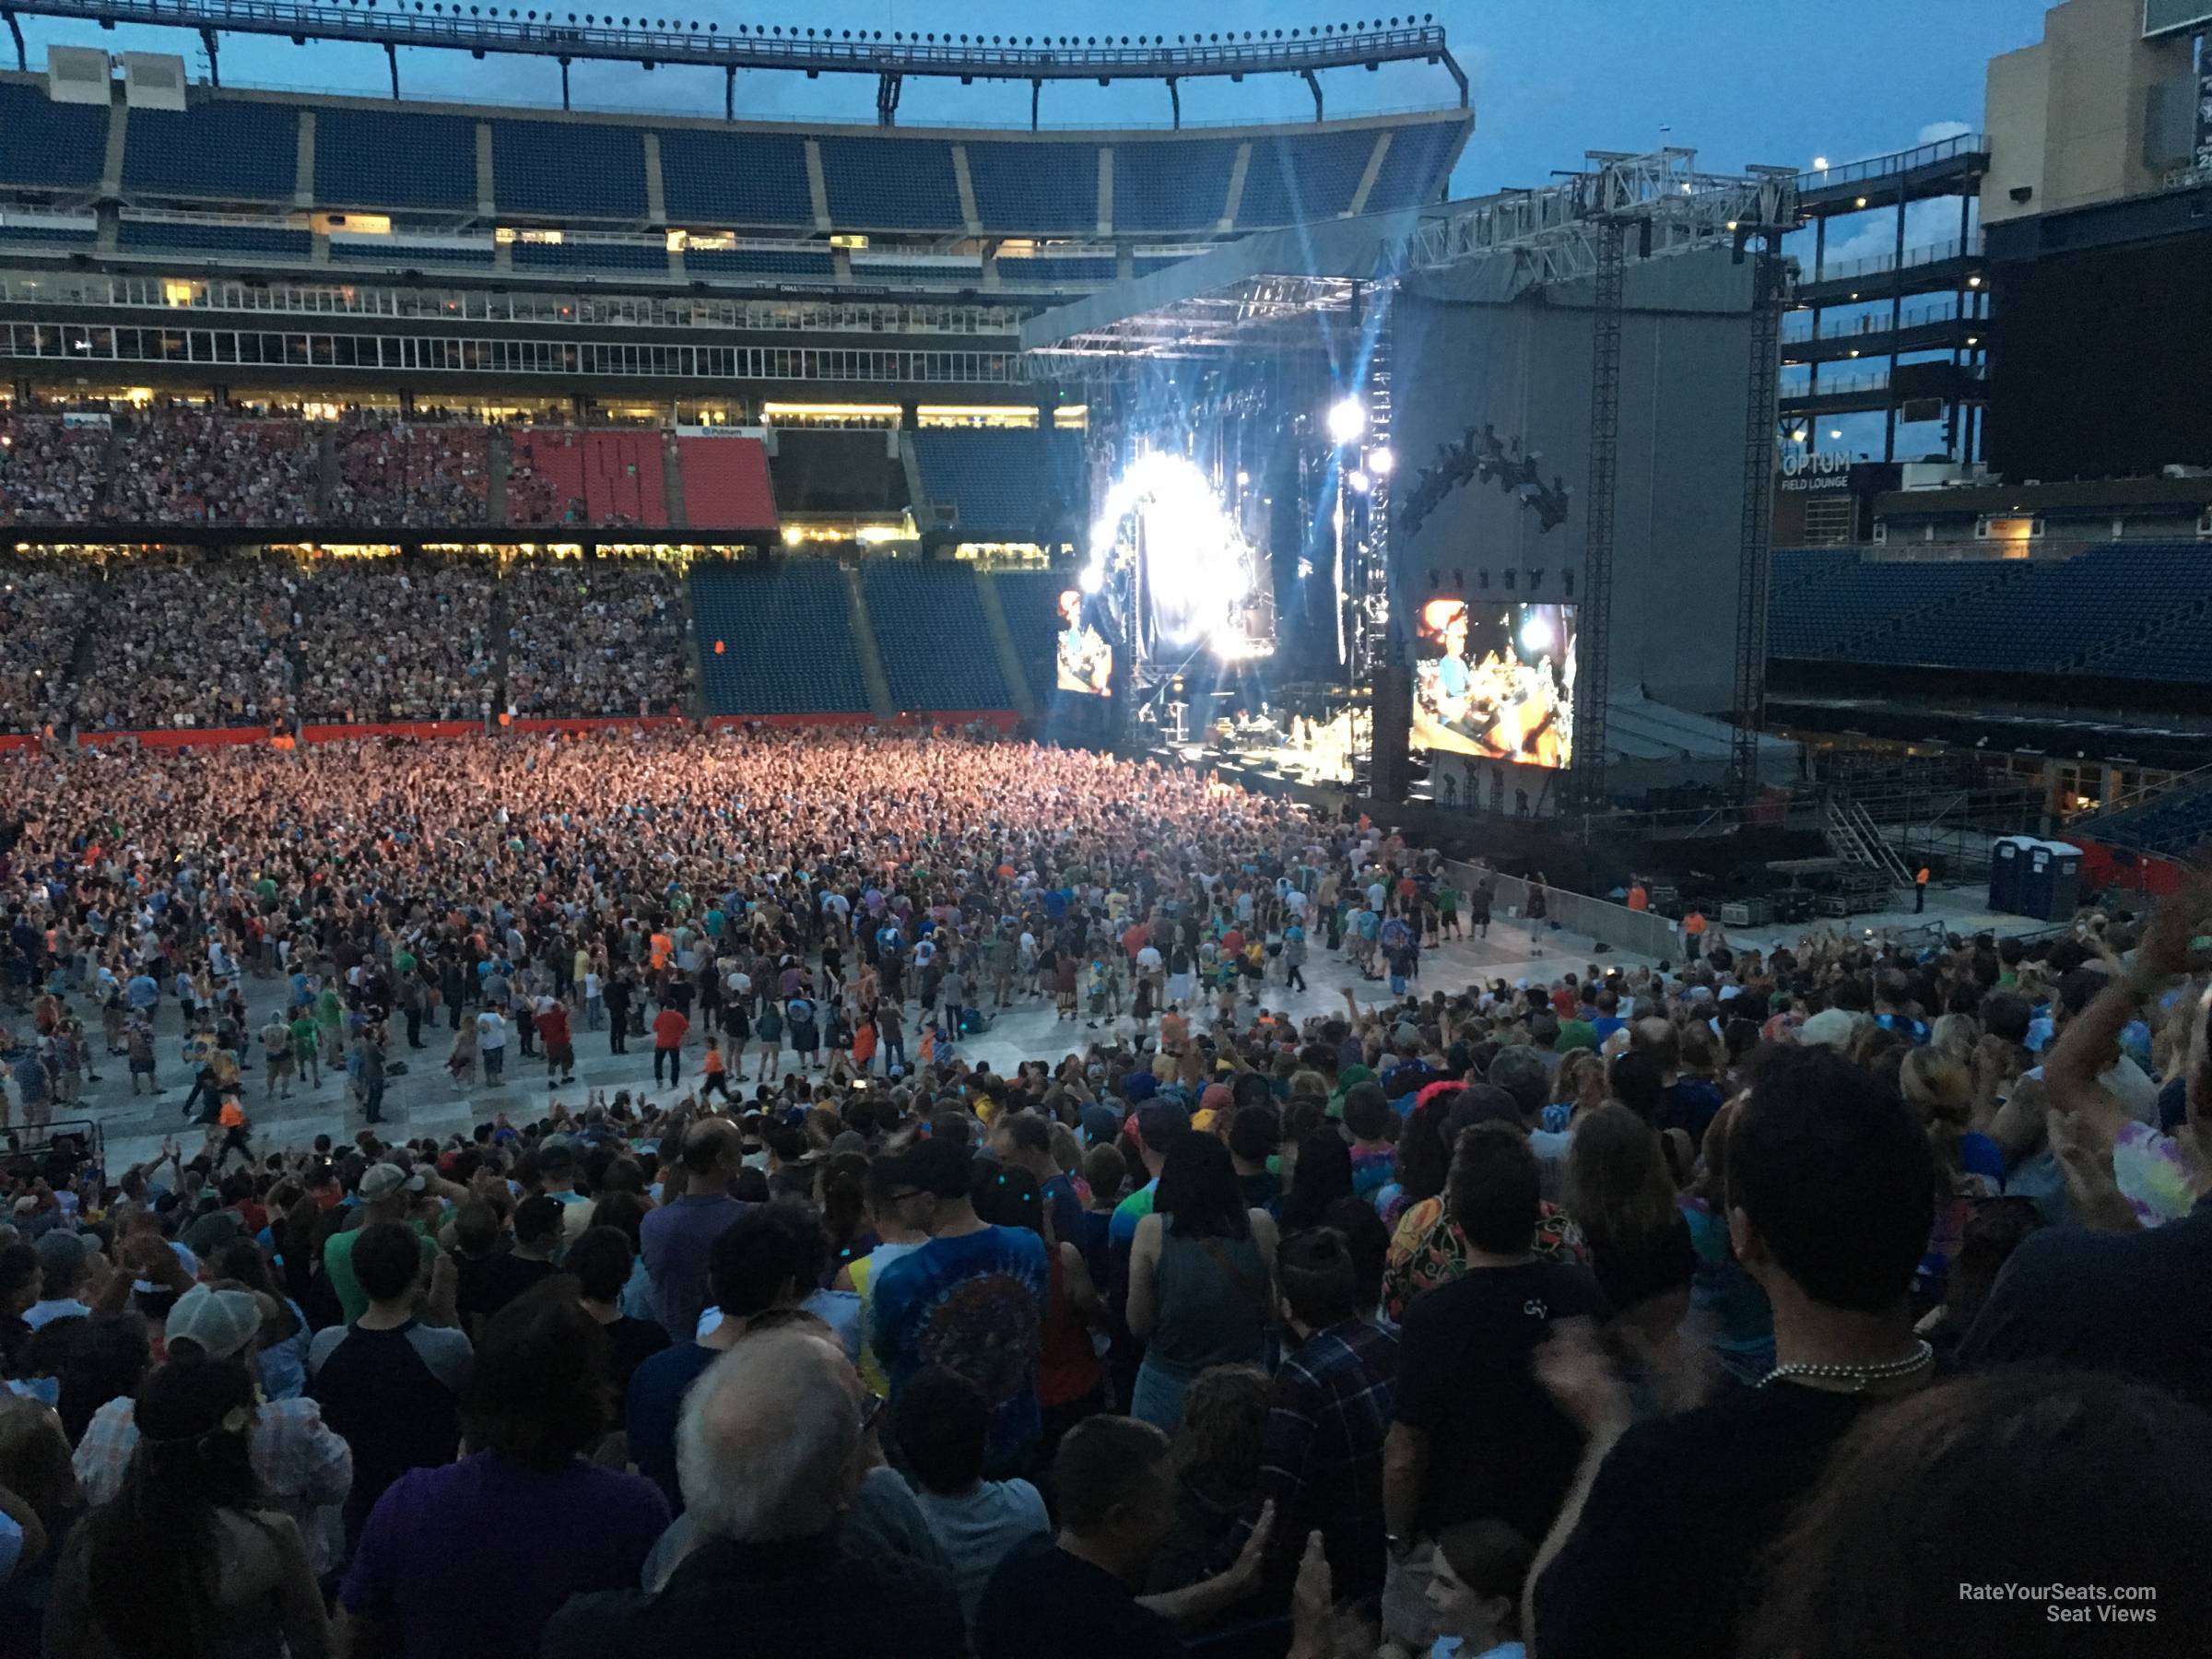 Section 130 at Gillette Stadium for Concerts